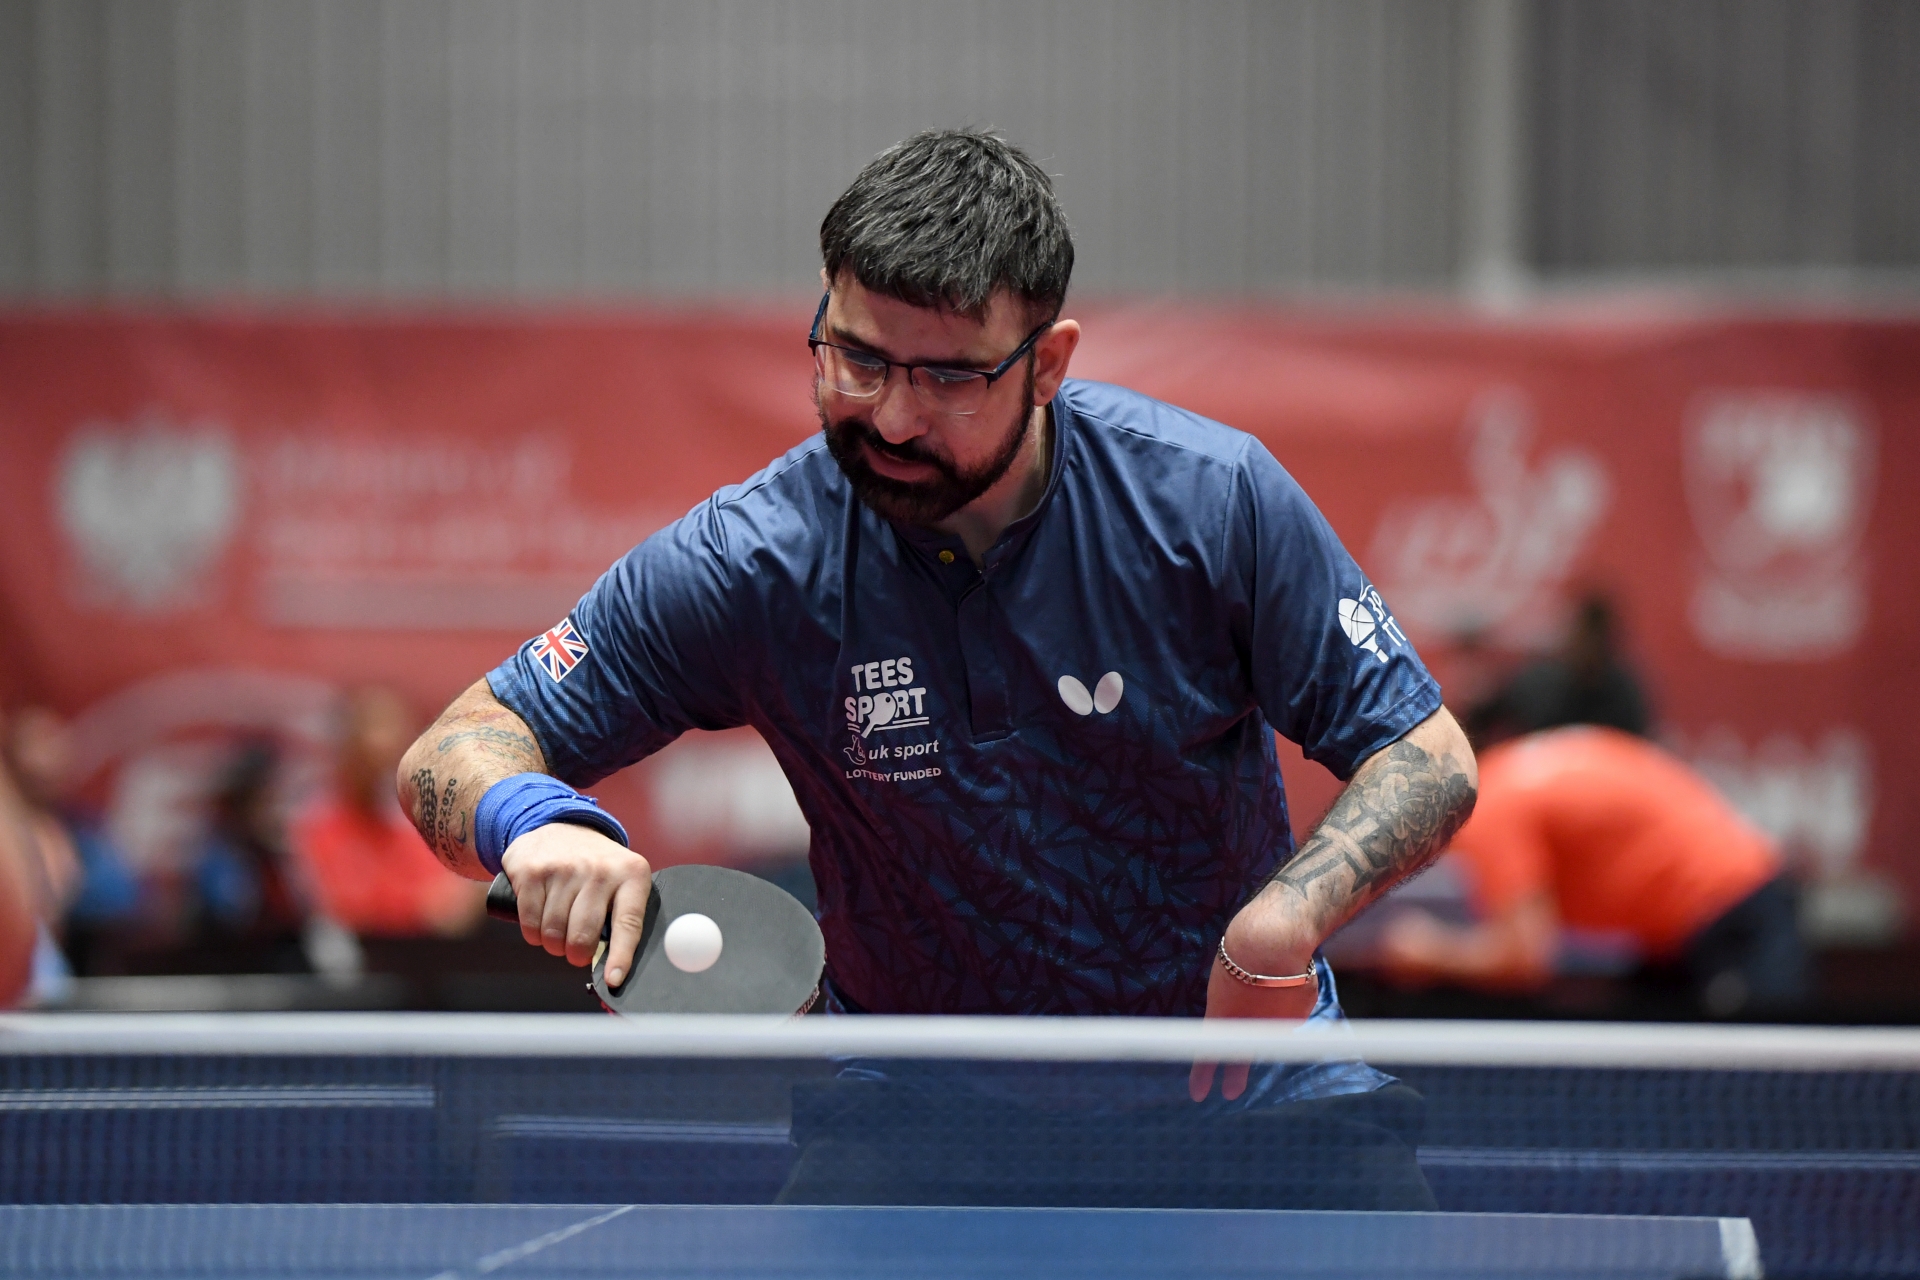 GB pick up two more medals as Polish Para Open ends